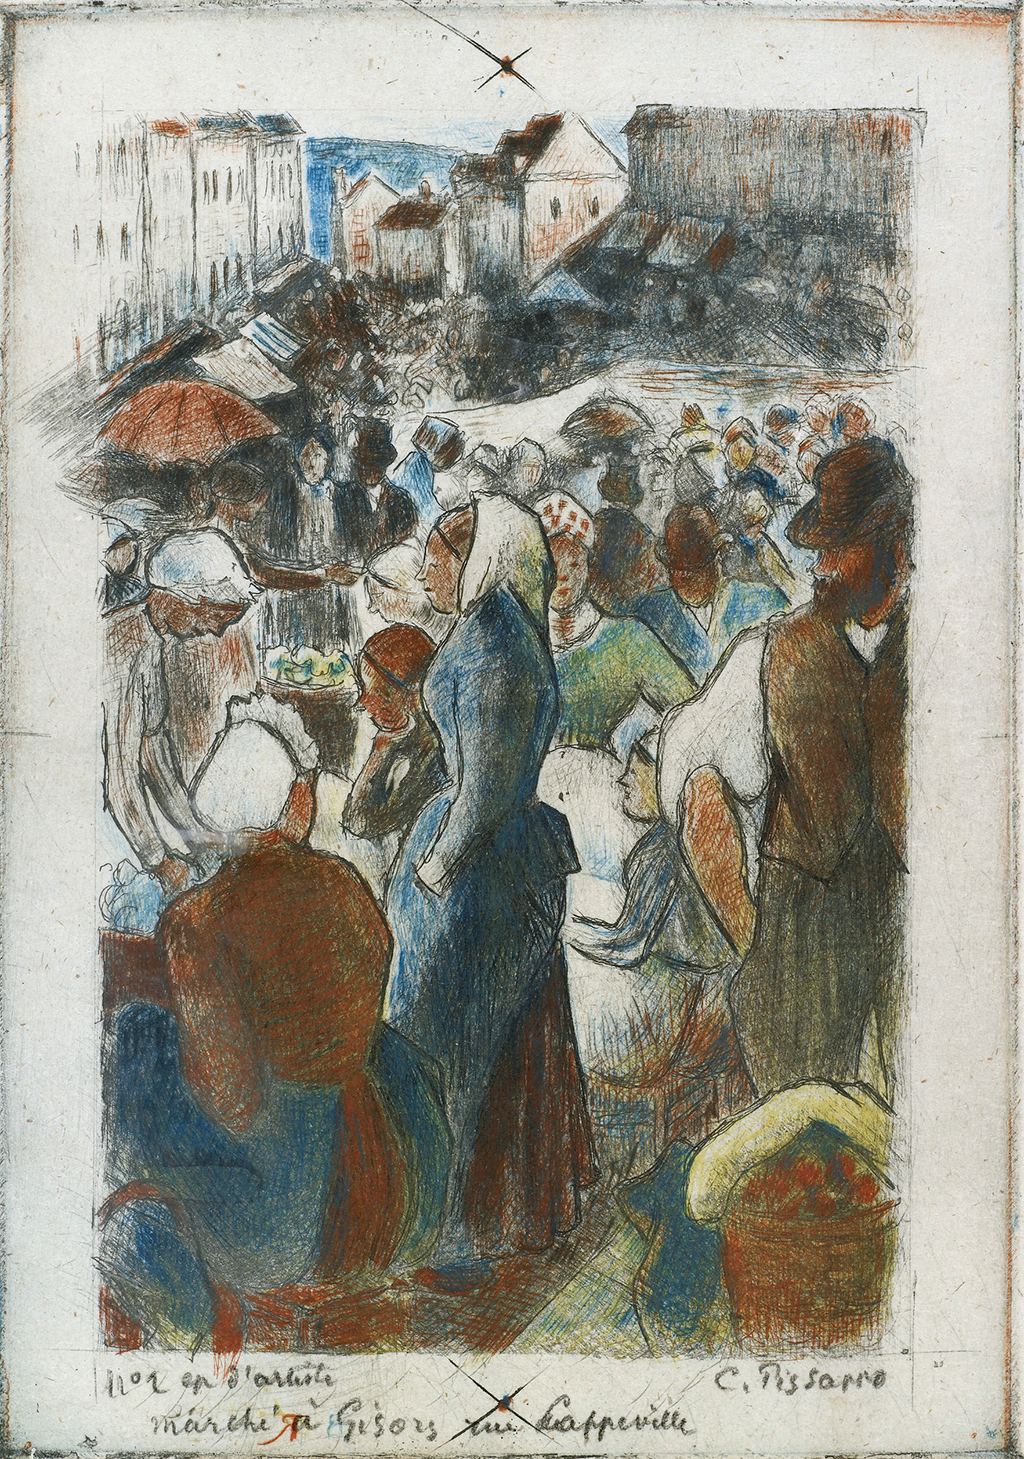 A sketch of a group of people in a marketplace talking with vendors and looking at their goods. The background is filled with more buildings that stretch toward the blue sky.